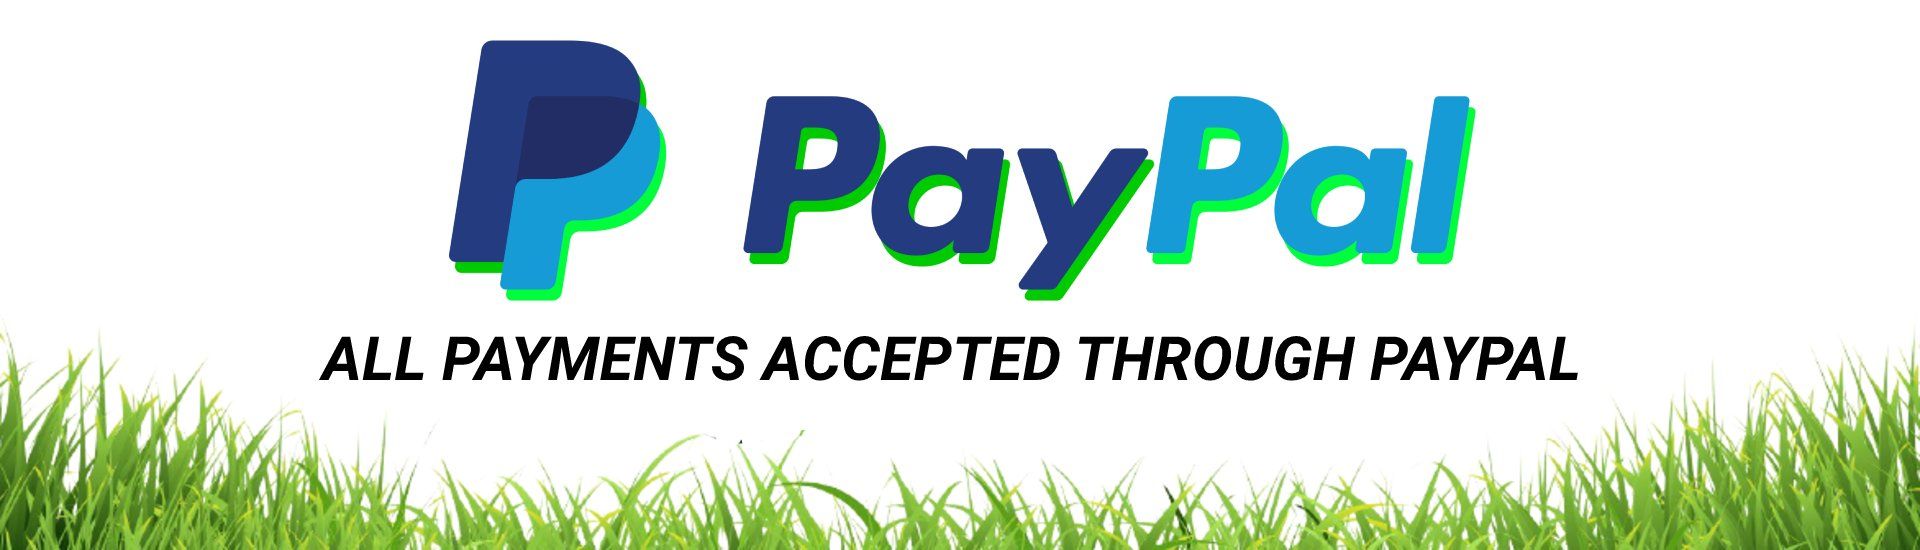 All payments discreetly accepted through the Paypal online transaction service